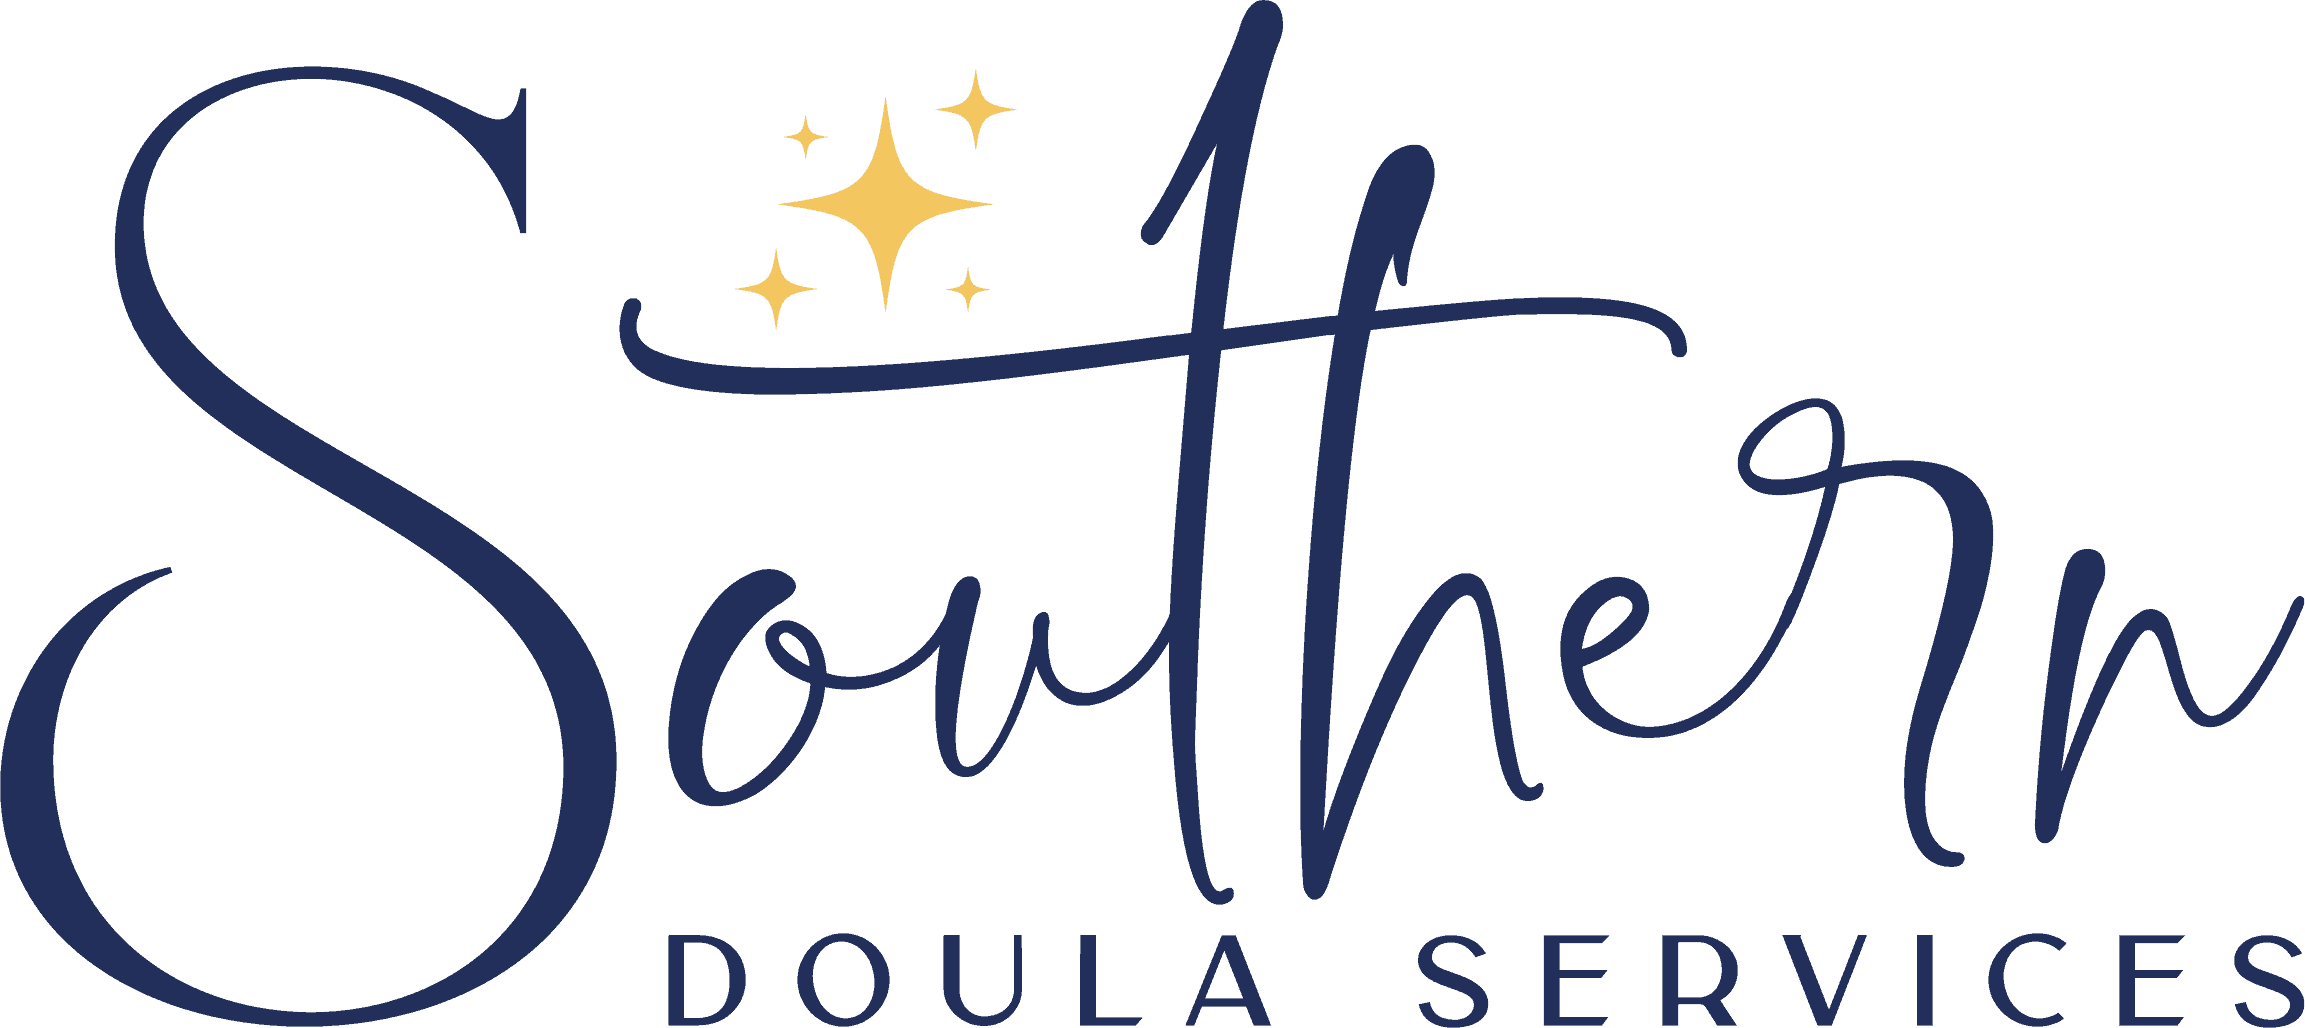 Southern Doula Services logo with Script for Southern and the rest in uppercase print, blue and yellow colors